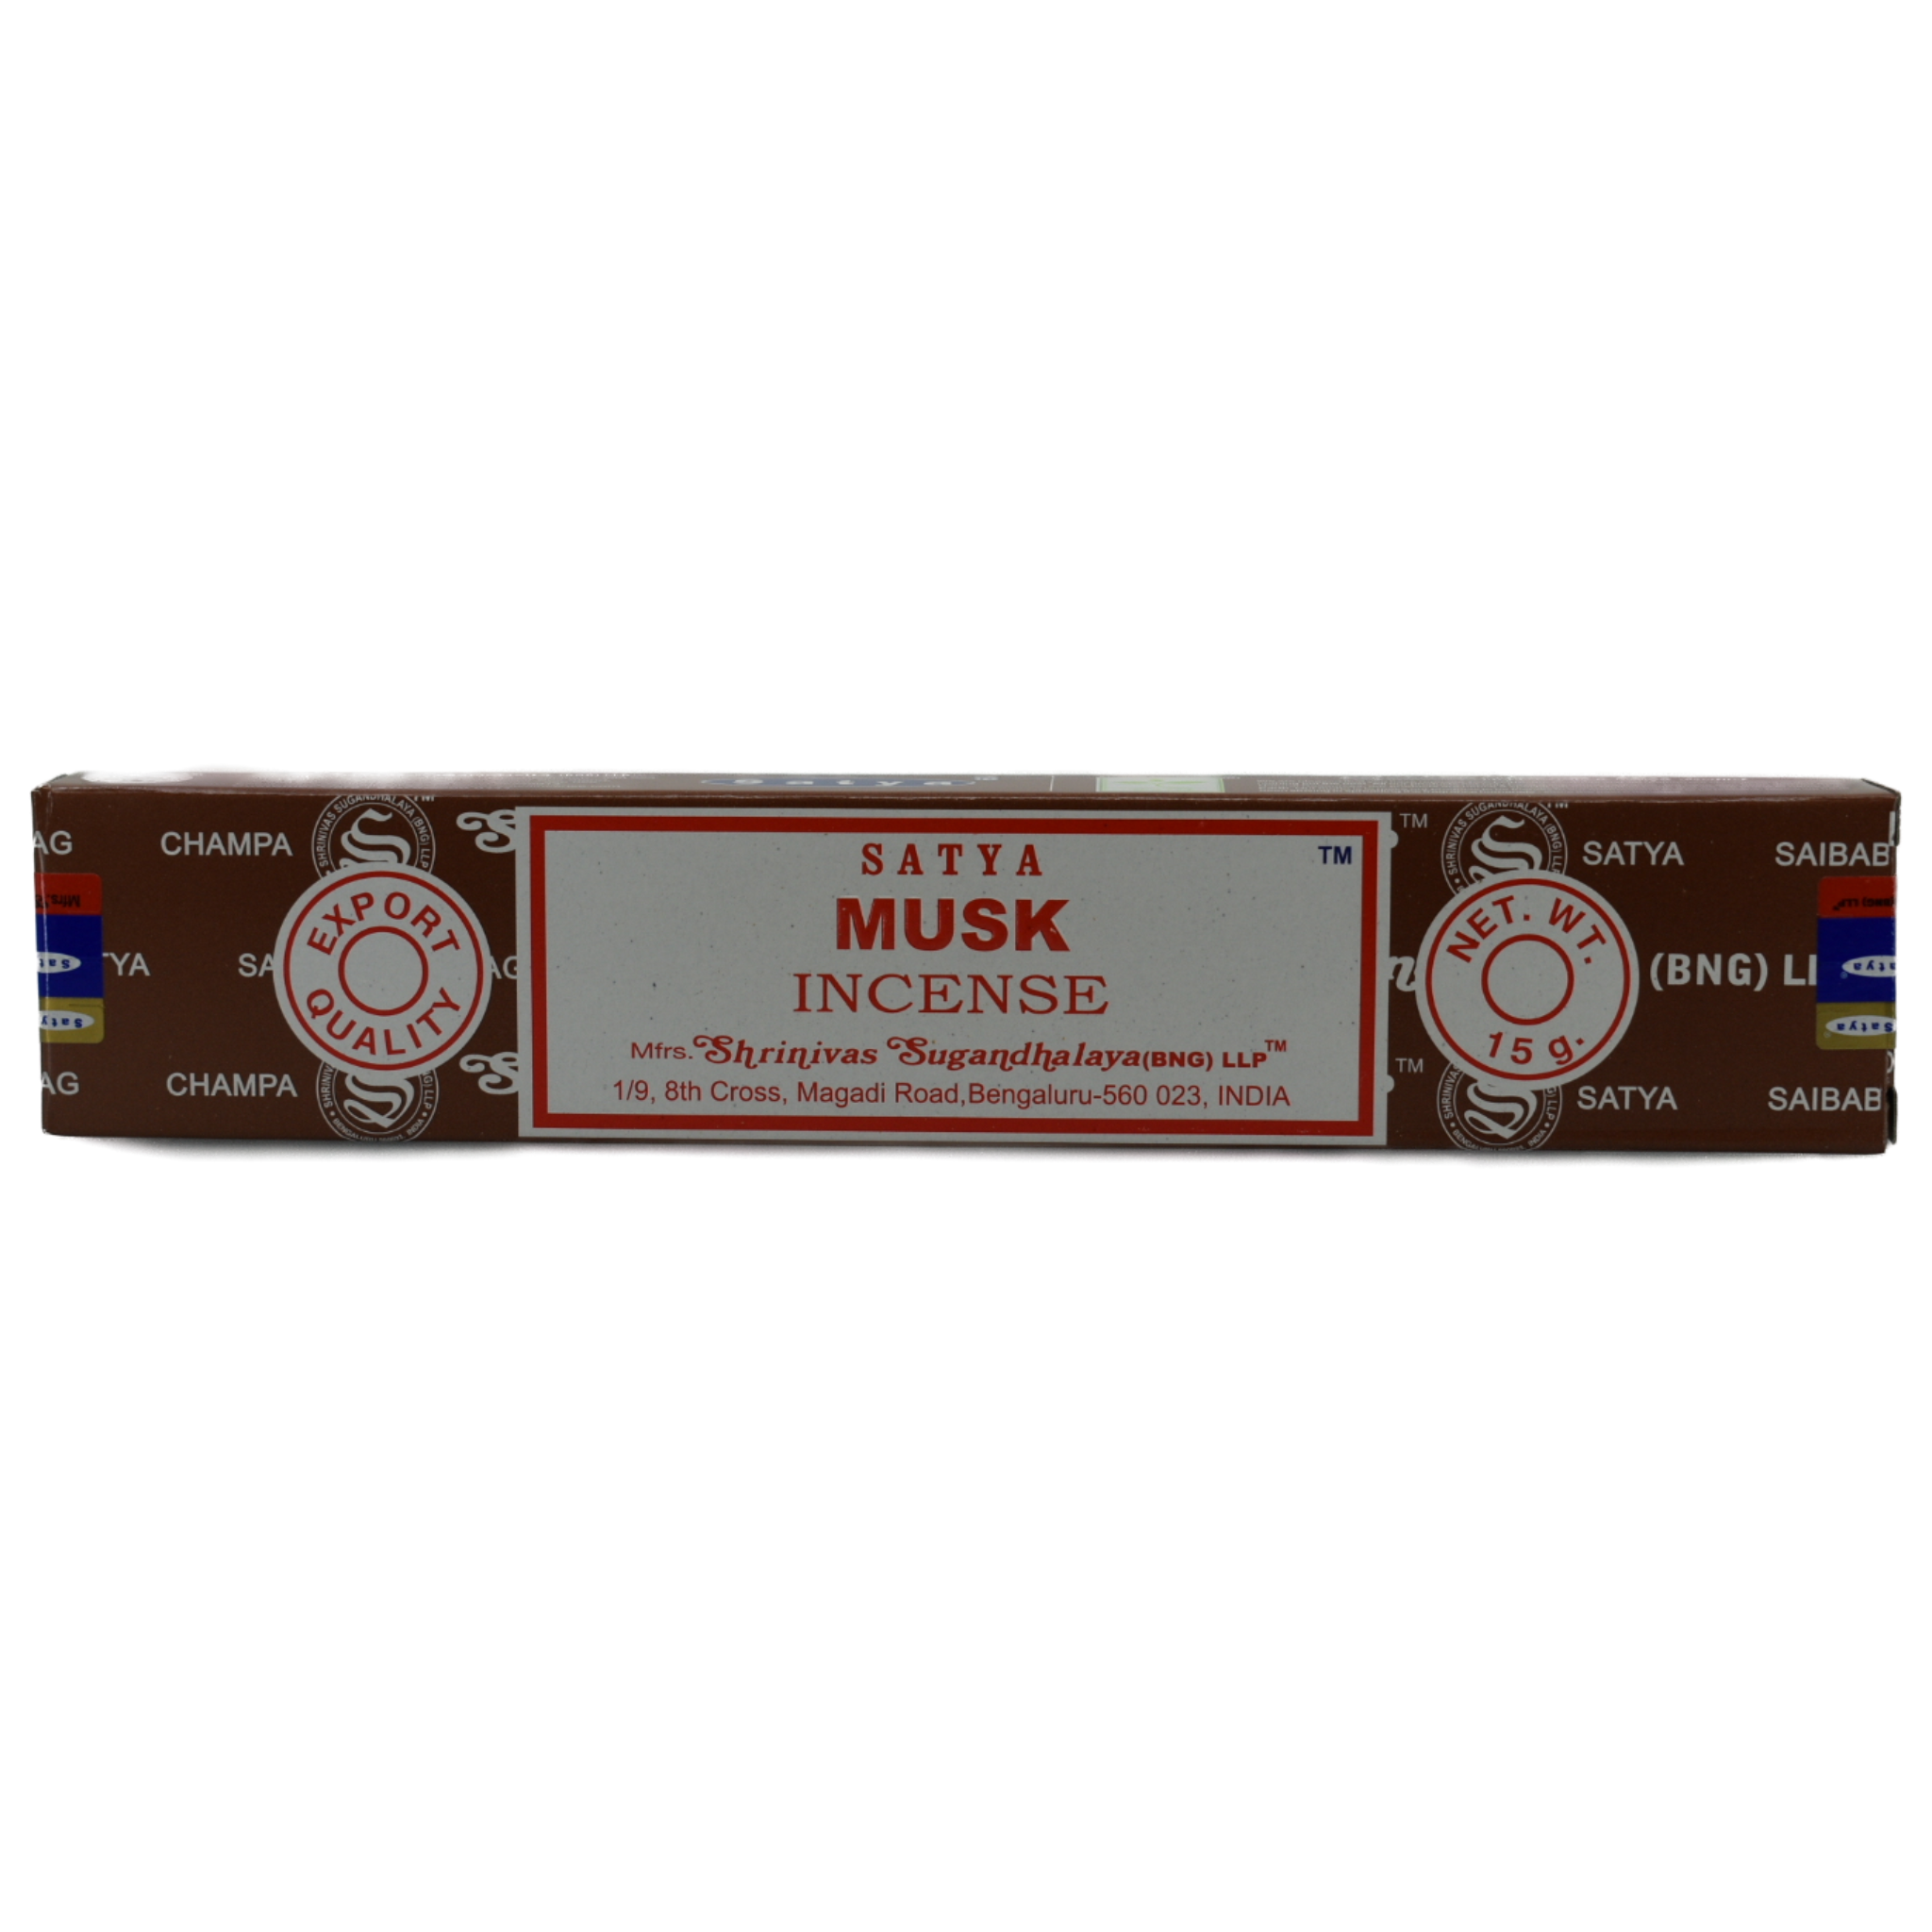 Musk Incense Sticks.  Box is brown with white lines that have company words as a design. The center of the box has a white rectangle with a red frame within the border. In the rectangle the top line has the company name. The next rows have the title Musk Incense. At the bottom of the rectangle is the manufacturer&